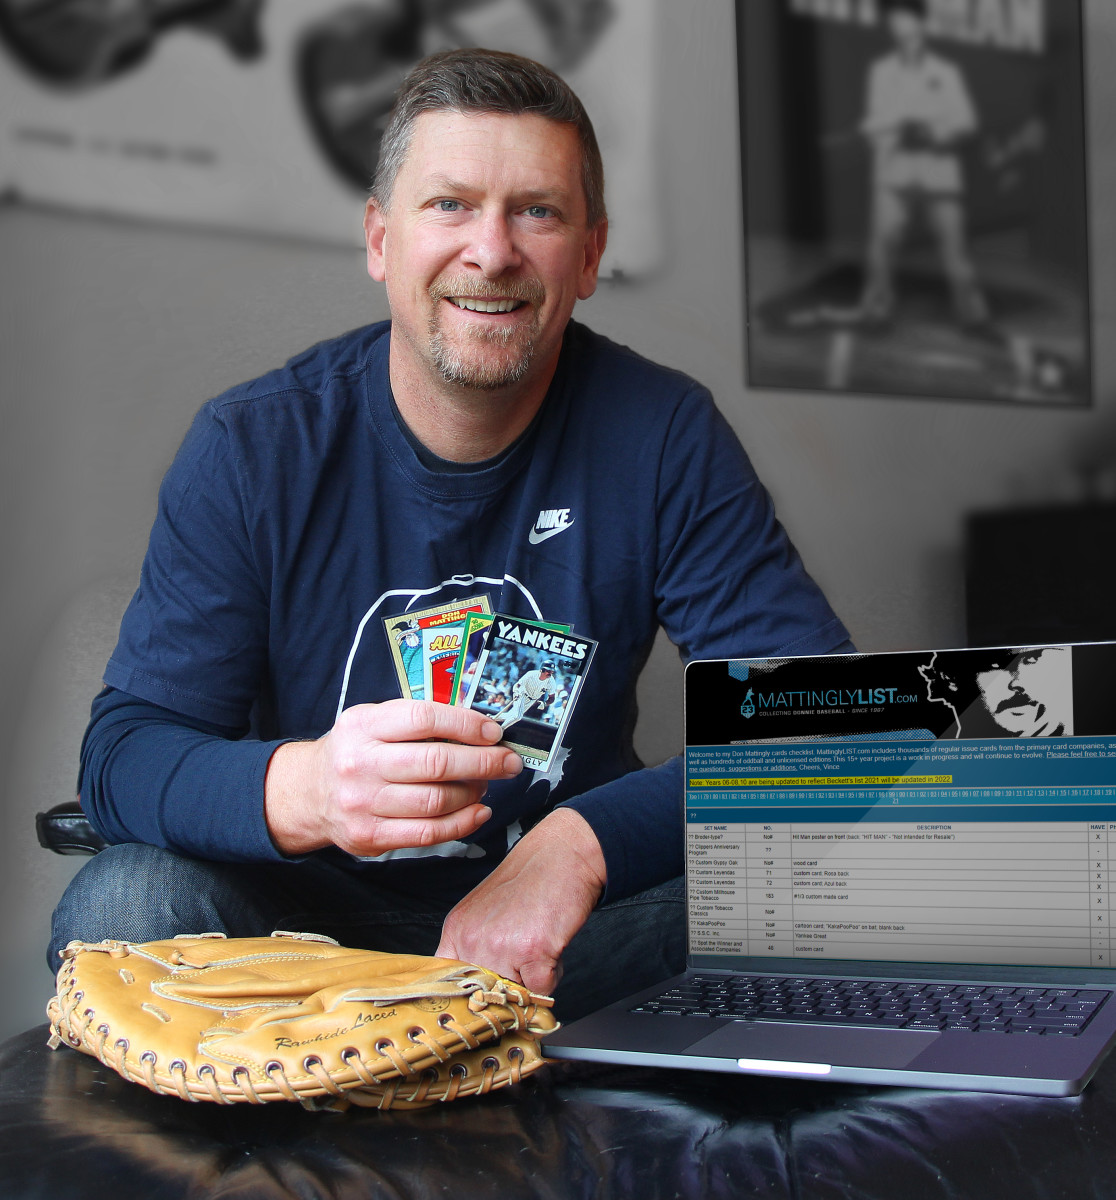 Longtime Don Mattingly collector Vince Ewert created an online Mattingly checklist that has become popular among other supercollectors.